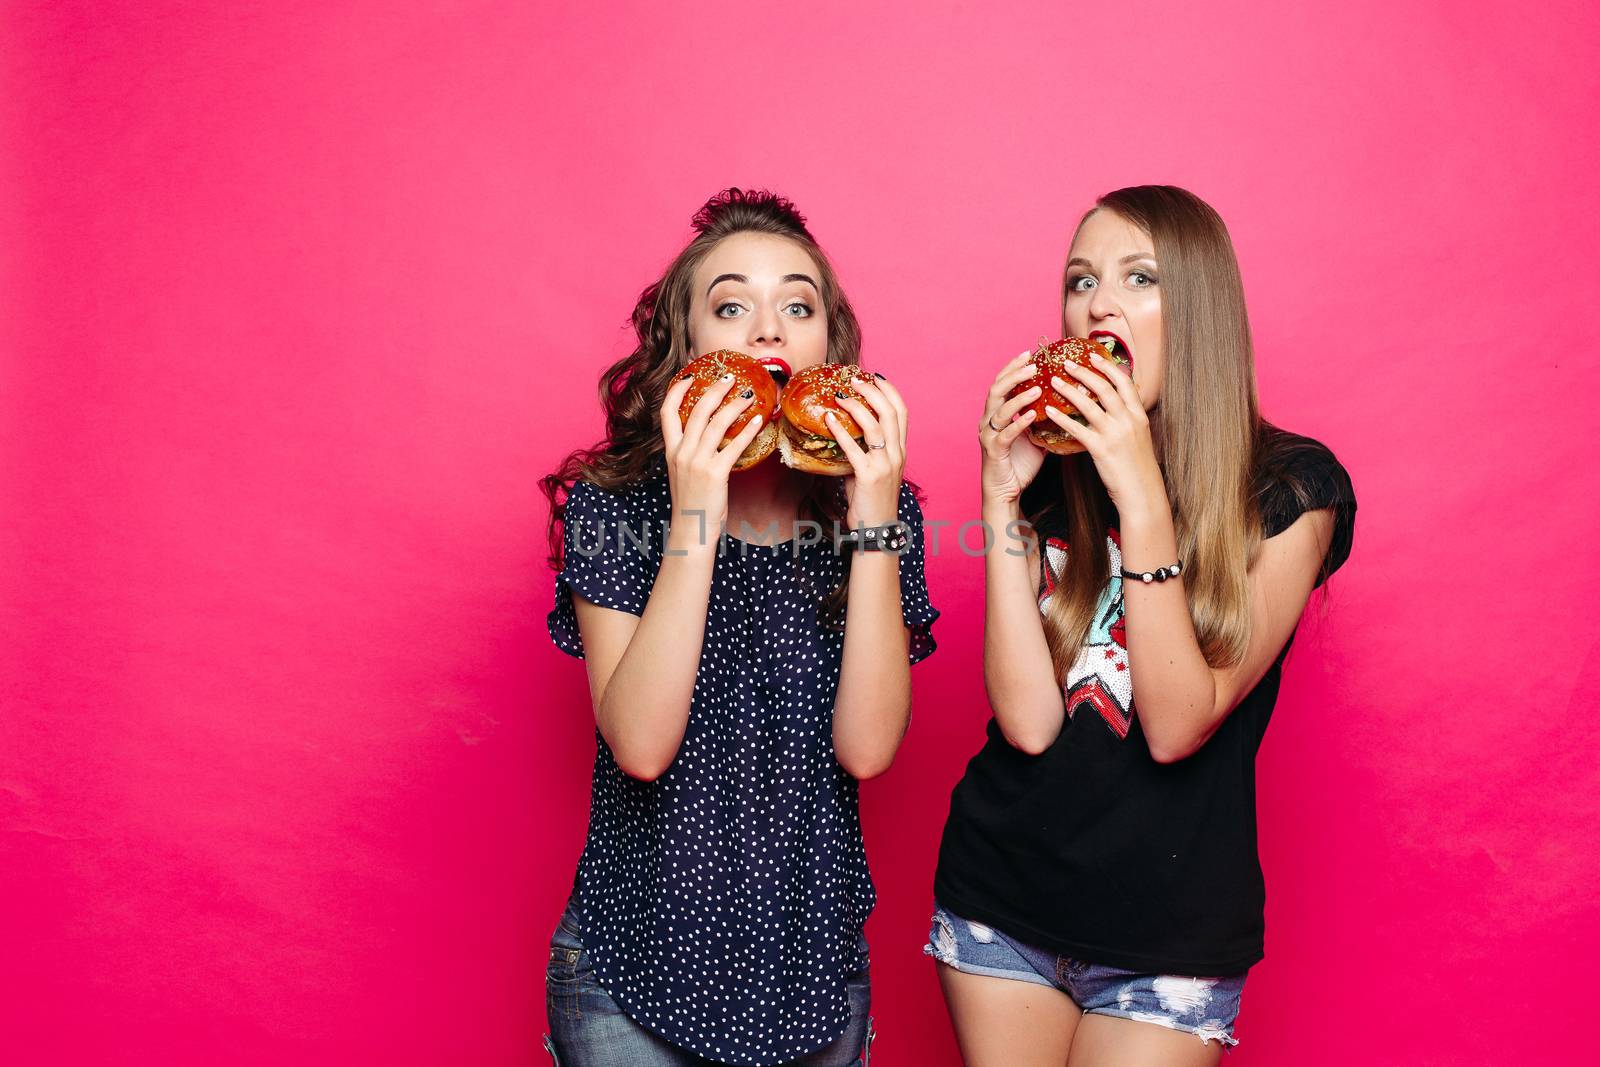 Studio portrait of girlfriends eating delicious and yummy burgers with chicken with hungry look at camera against vivid magenta background.